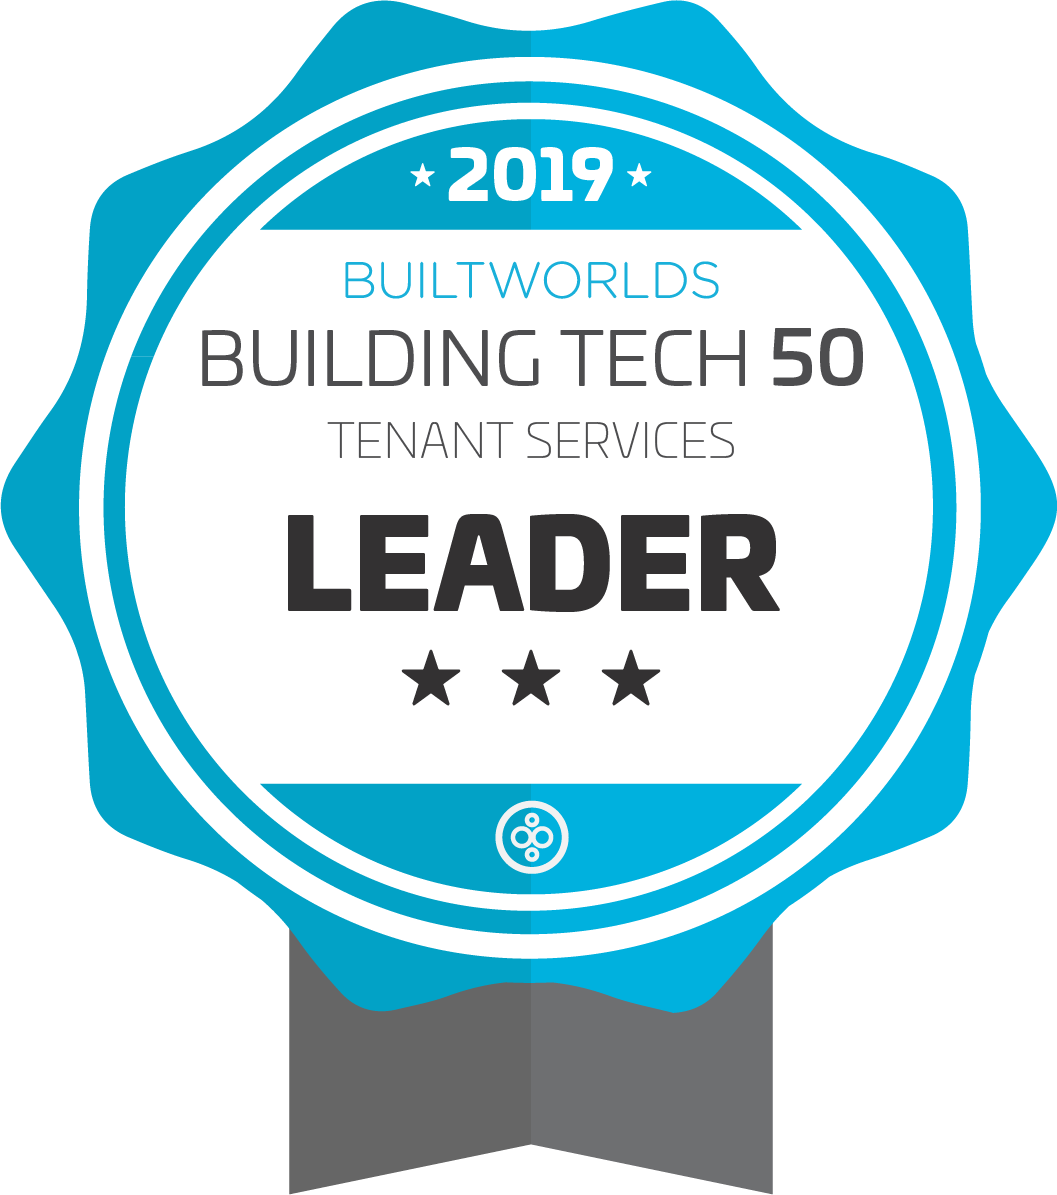 Tenant Services LEADER